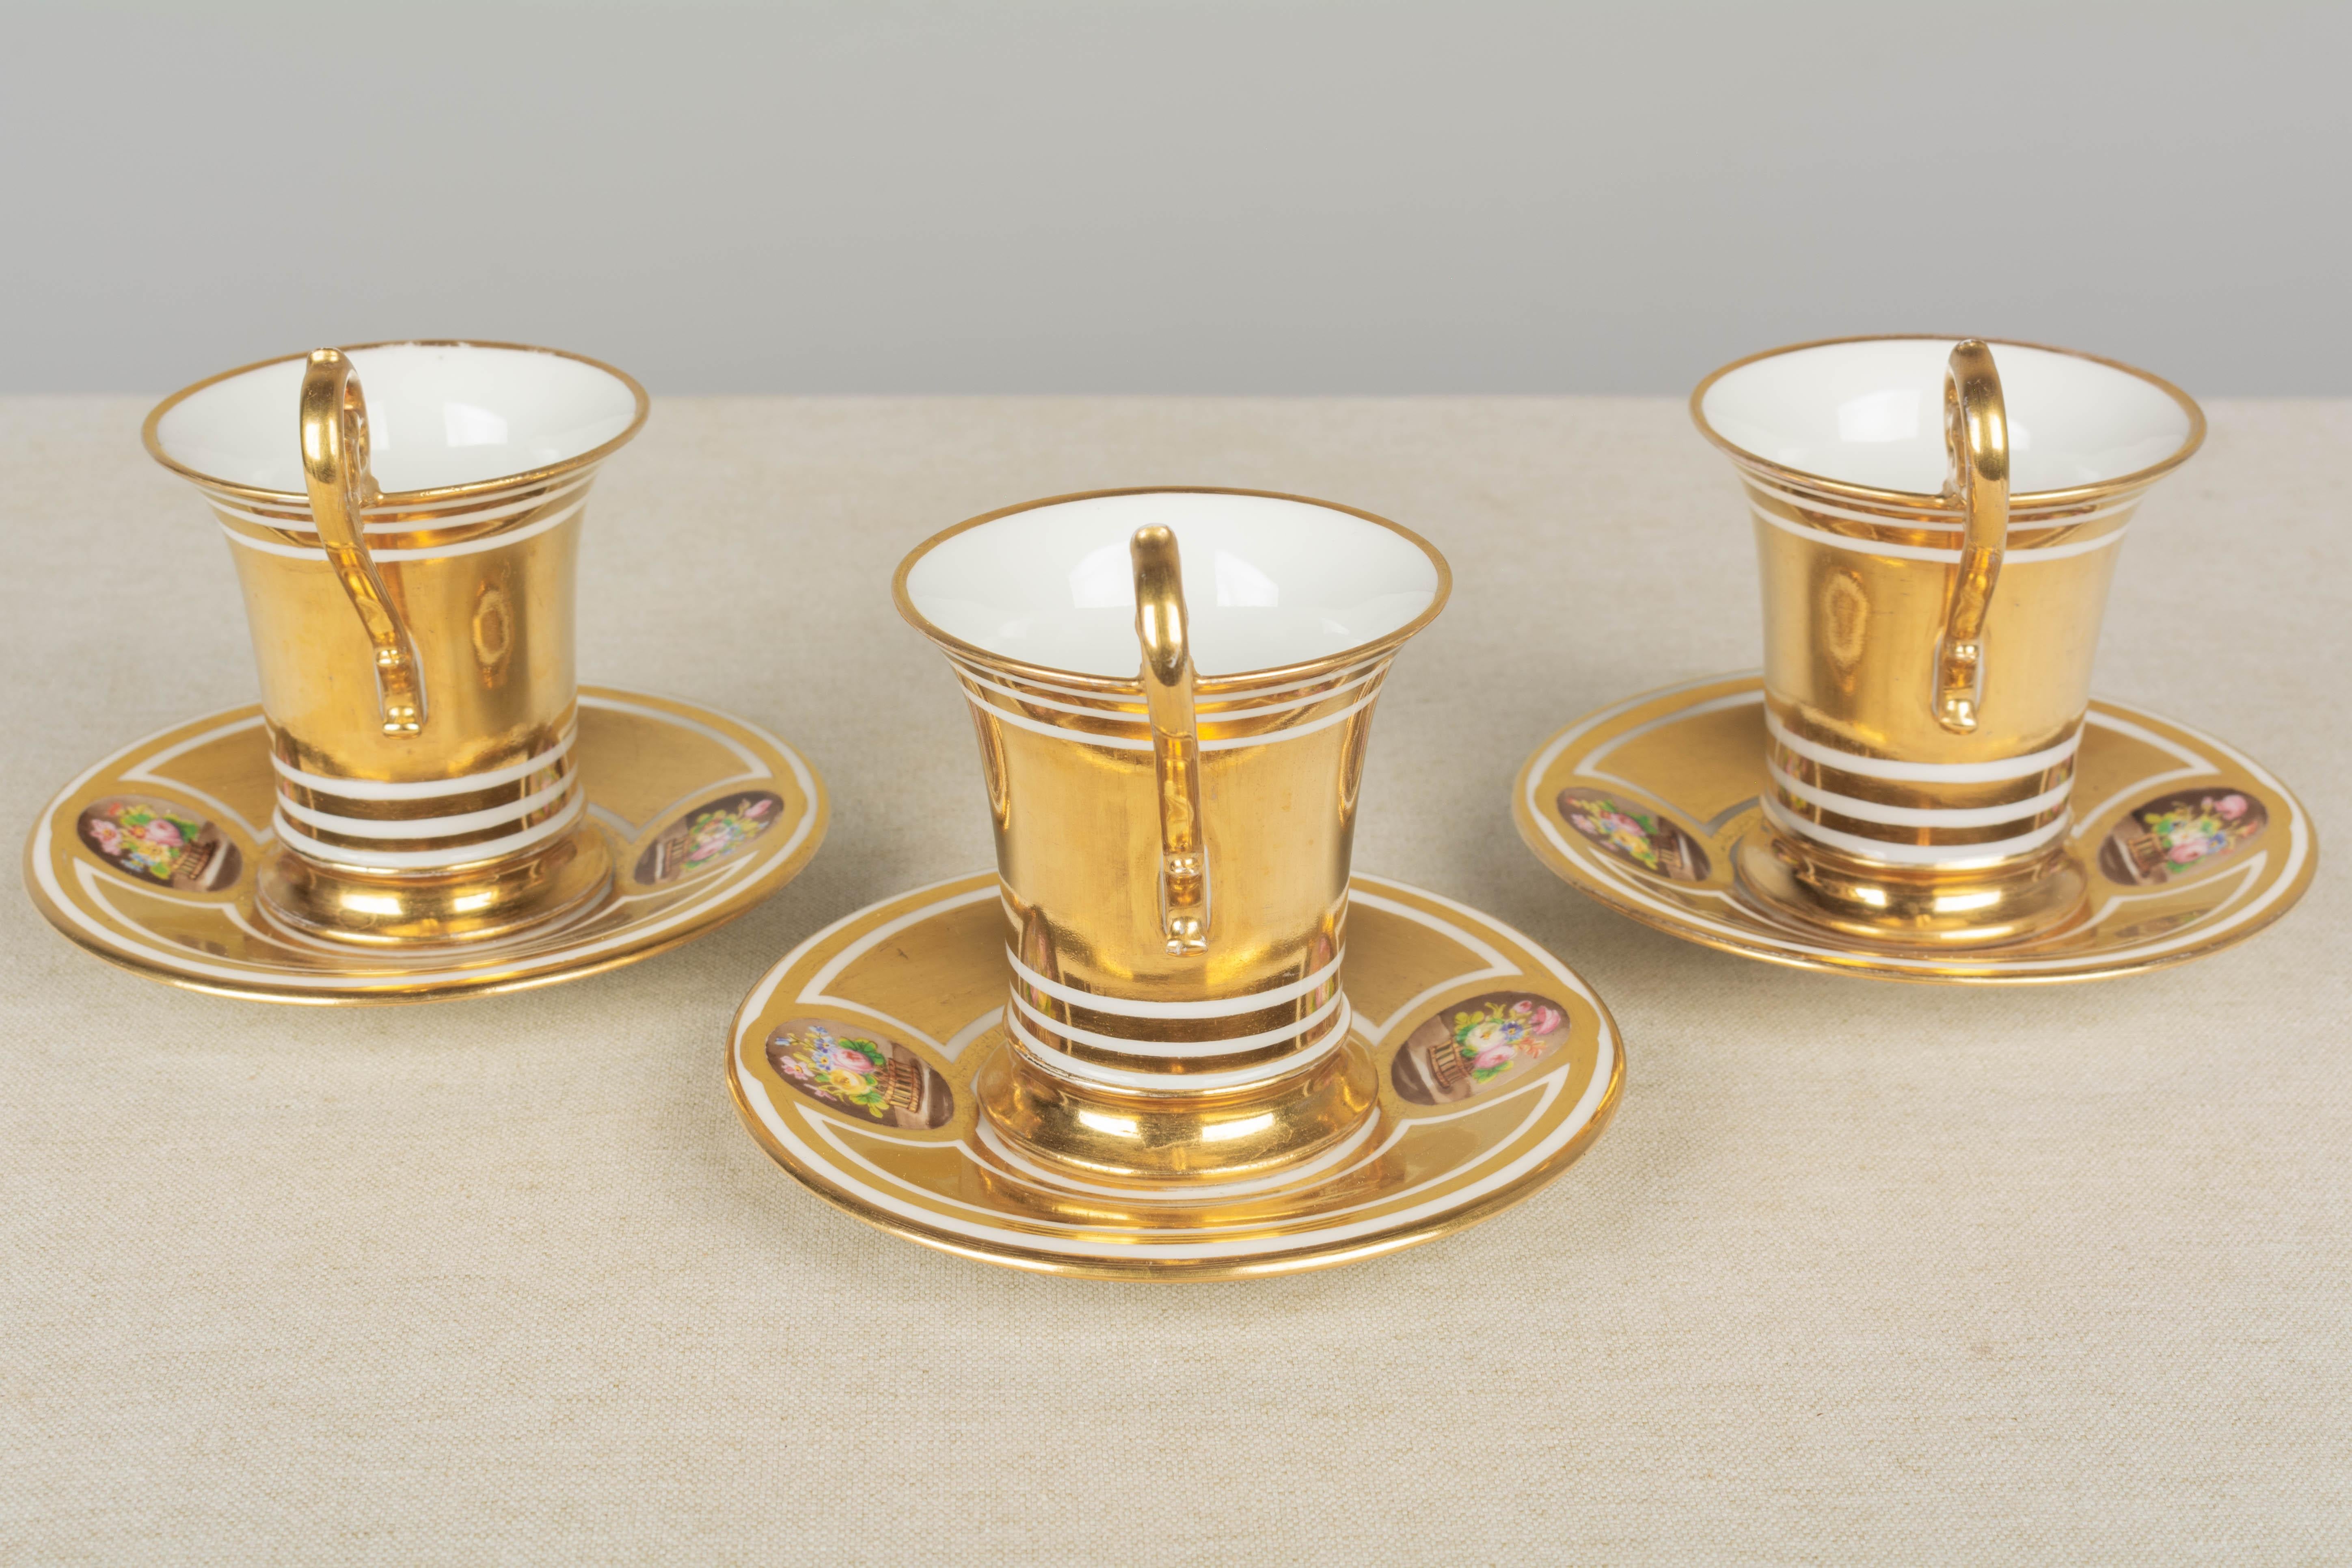 19th Century French Sèvres Gilt Porcelain Cup & Saucer, Set of 3 For Sale 2